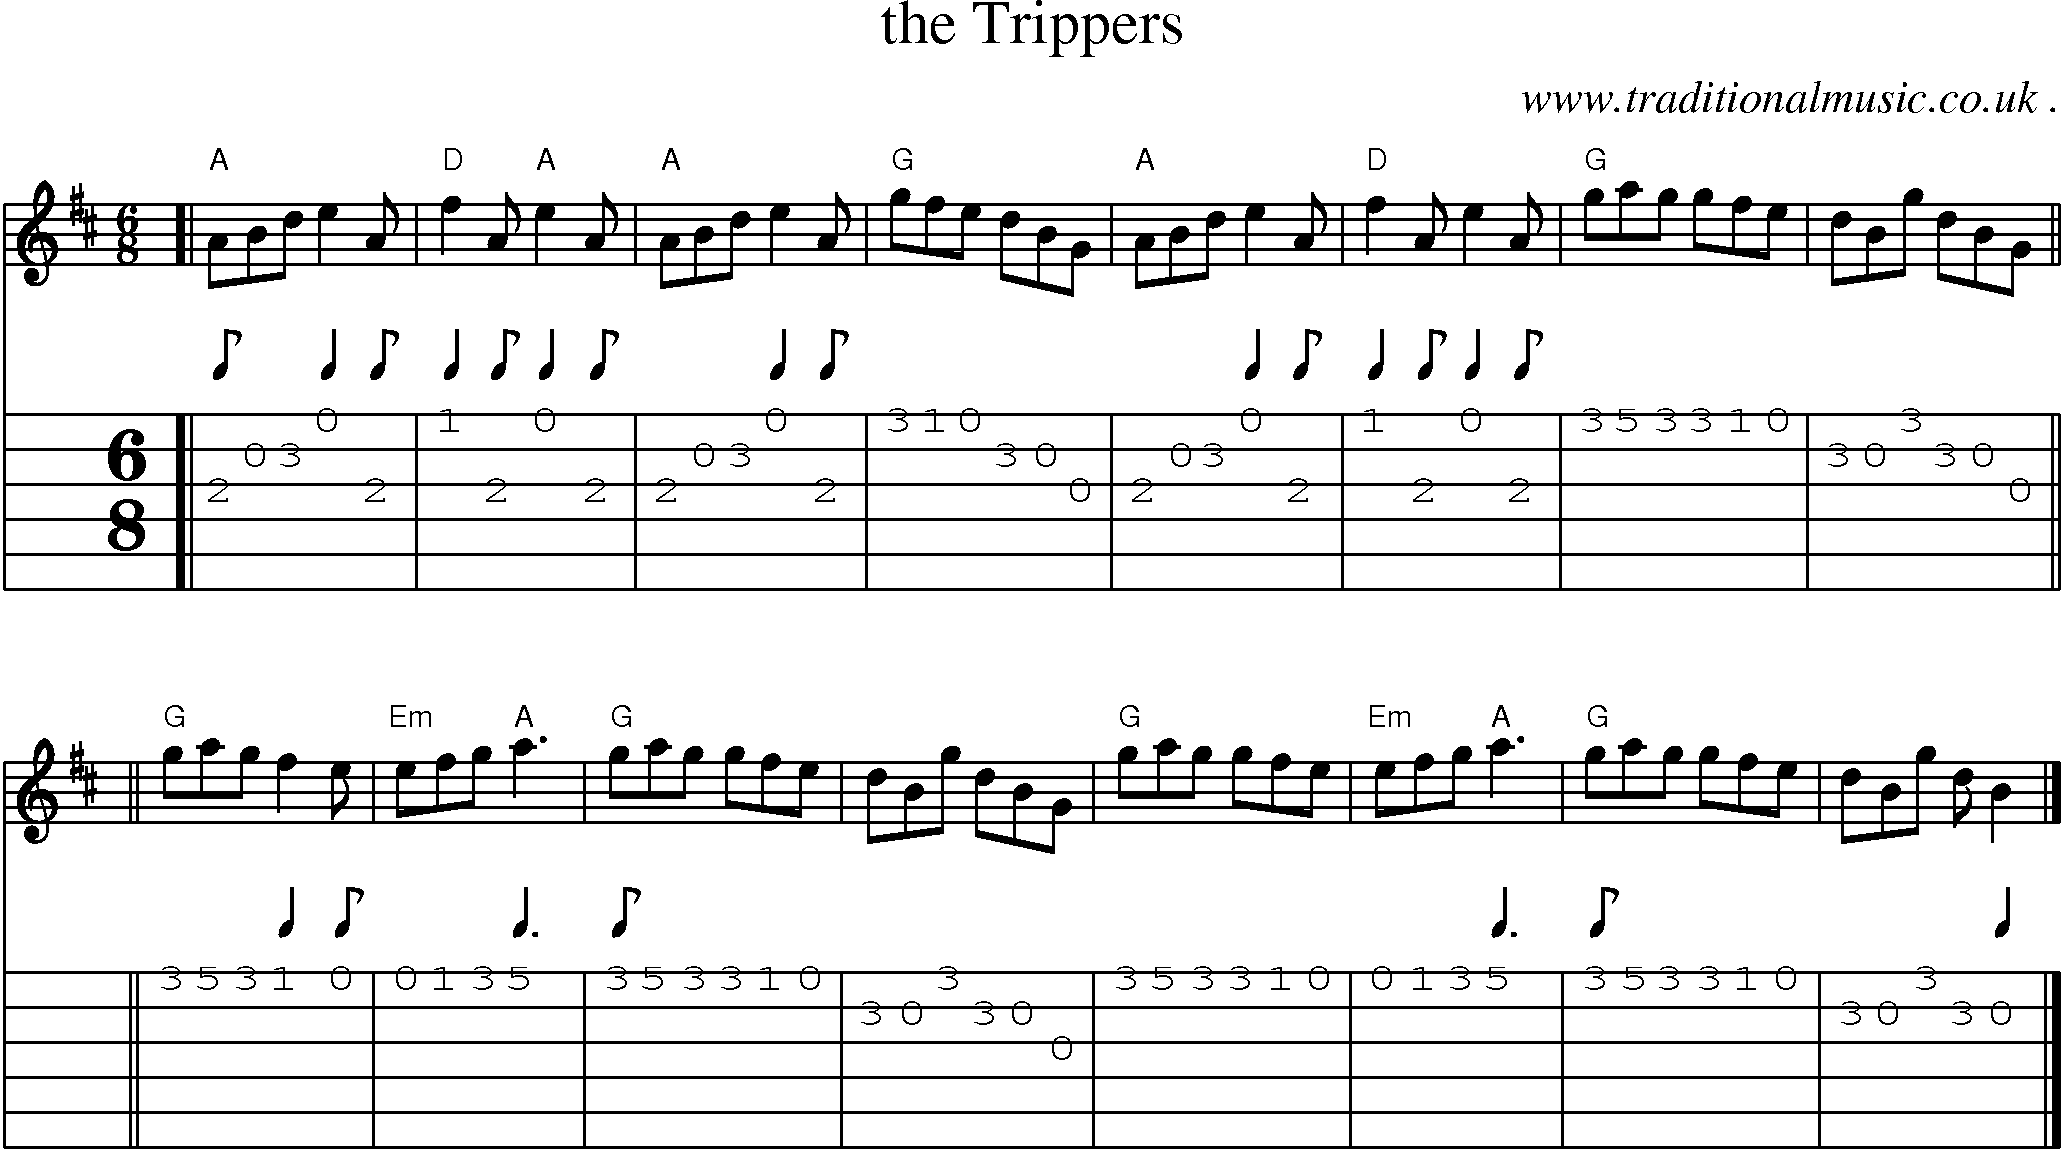 Sheet-music  score, Chords and Guitar Tabs for The Trippers